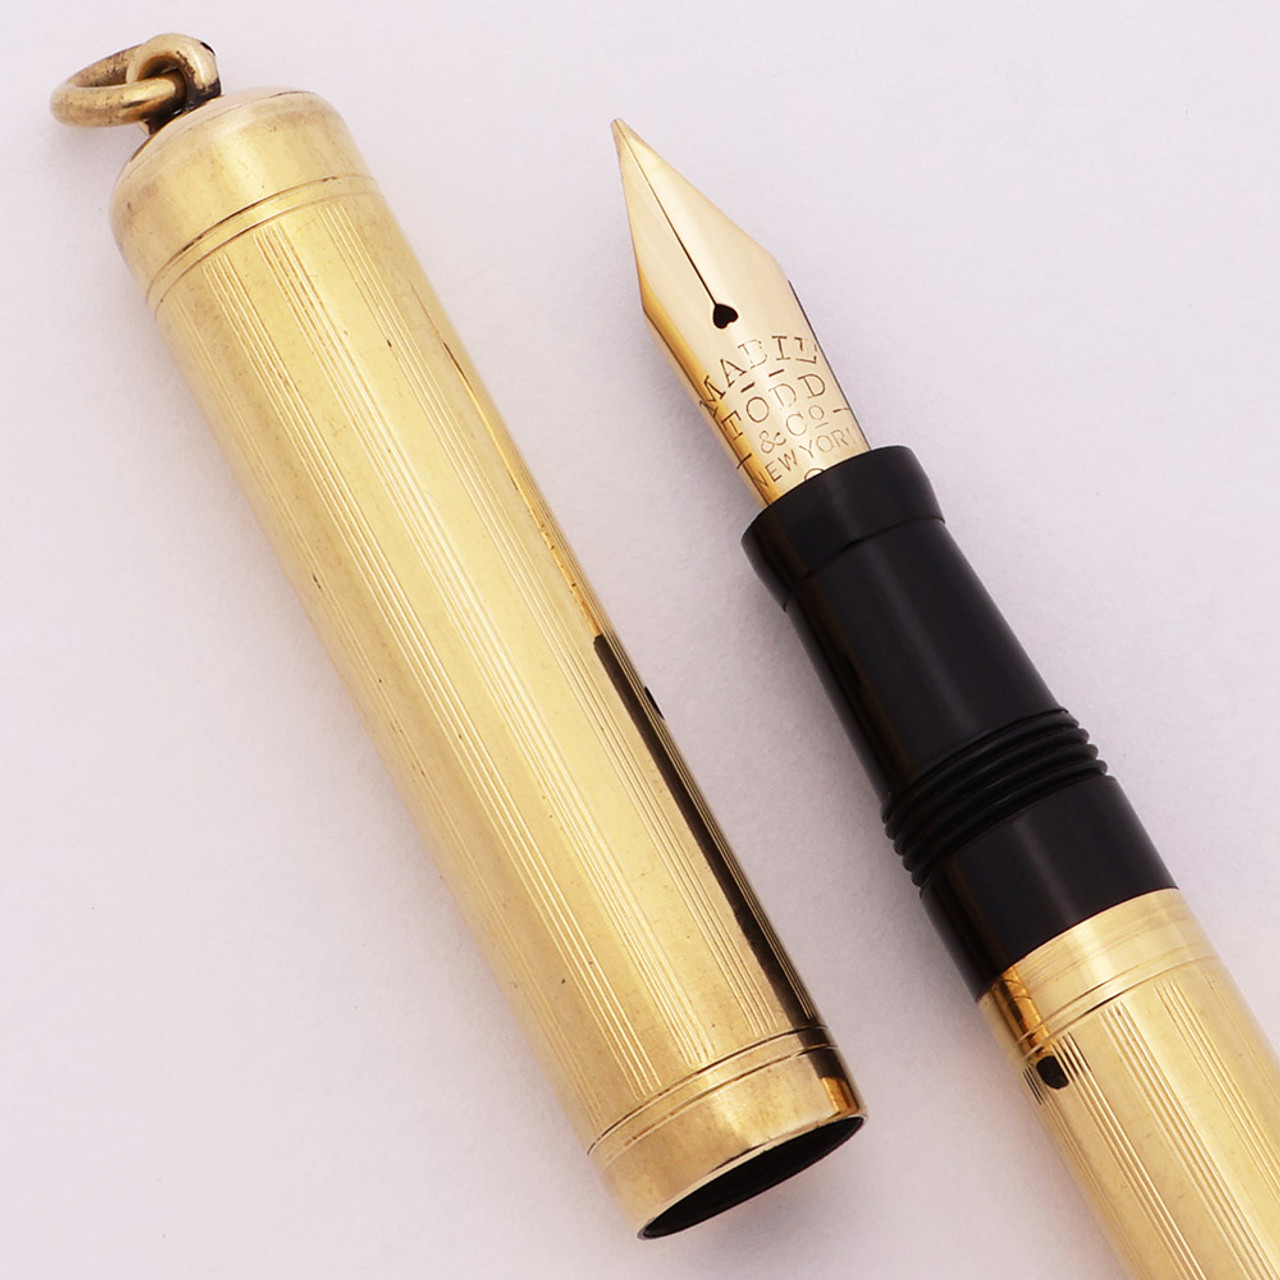 Mabie Todd (USA) Swan Ring Top Fountain Pen - Gold Filled, Eyedropper, Flexible Fine (Excellent +, Restored)